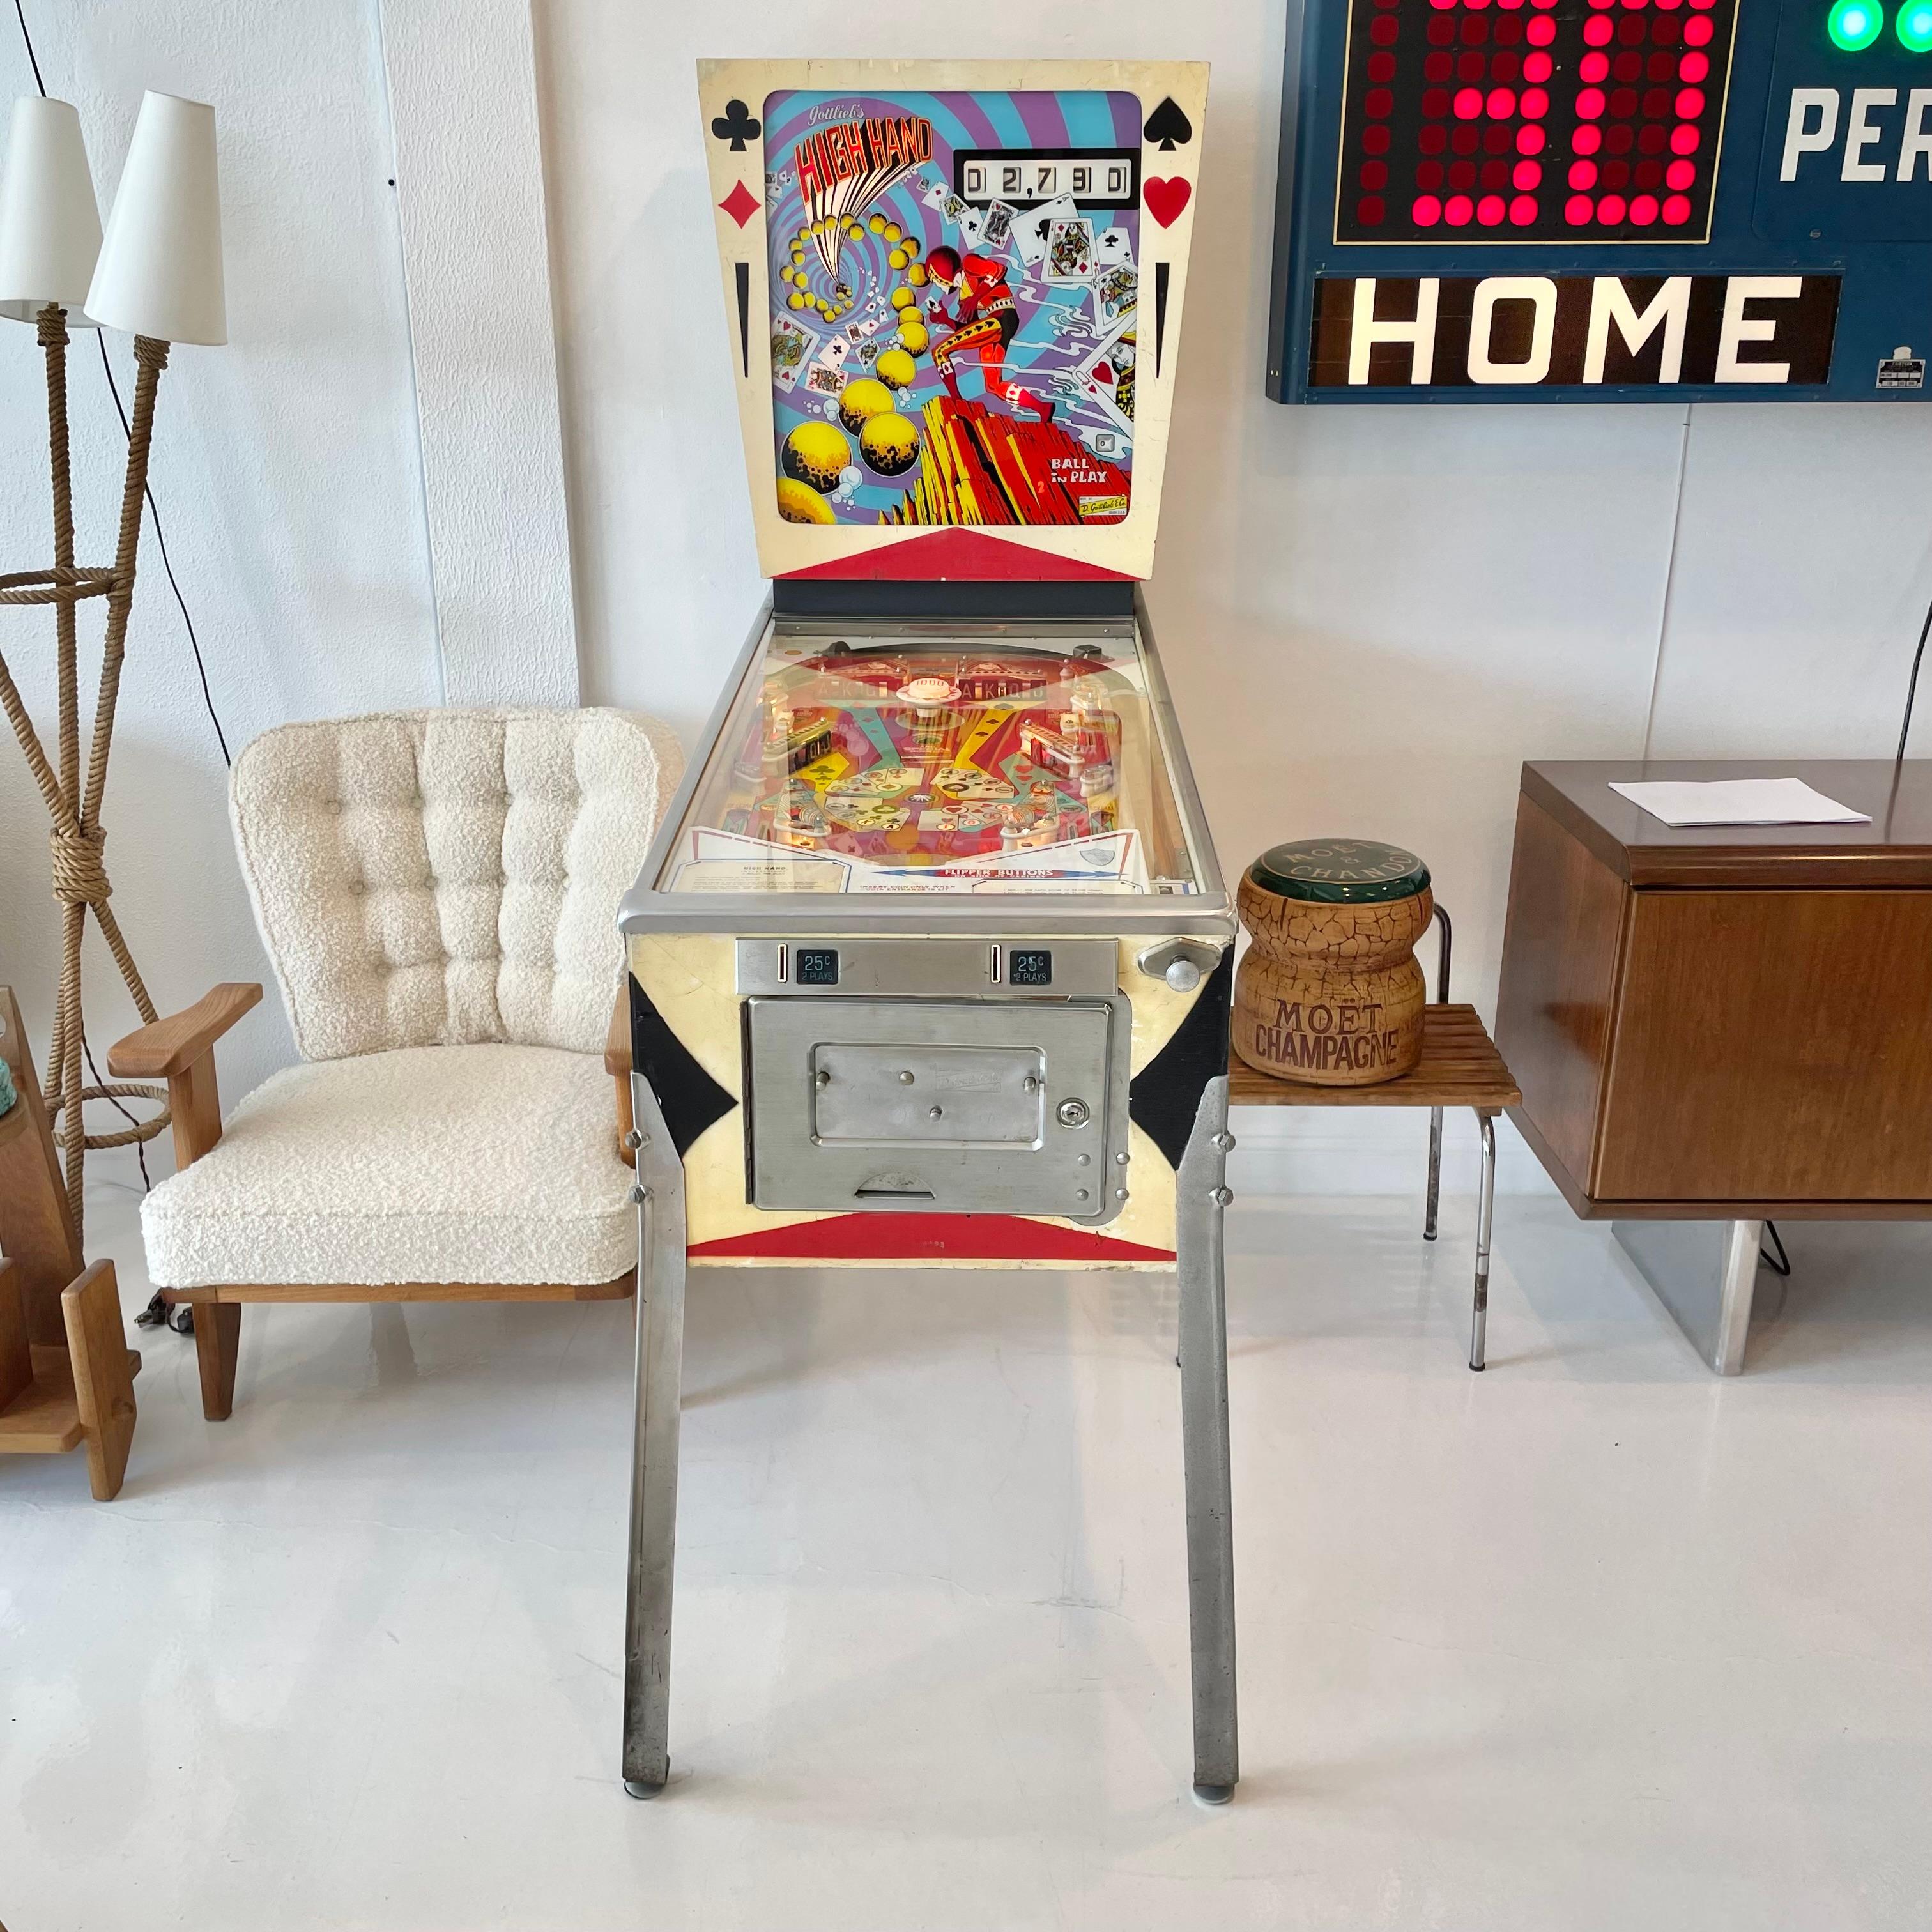 Vintage 'HIGH HAND' pinball machine from 1973. Made by D. Gottlieb & Company and designed by Ed Krynski. In excellent working condition. Great visuals and sounds. Extremely fun paced gameplay. This game features slingshots, drop targets, kick out